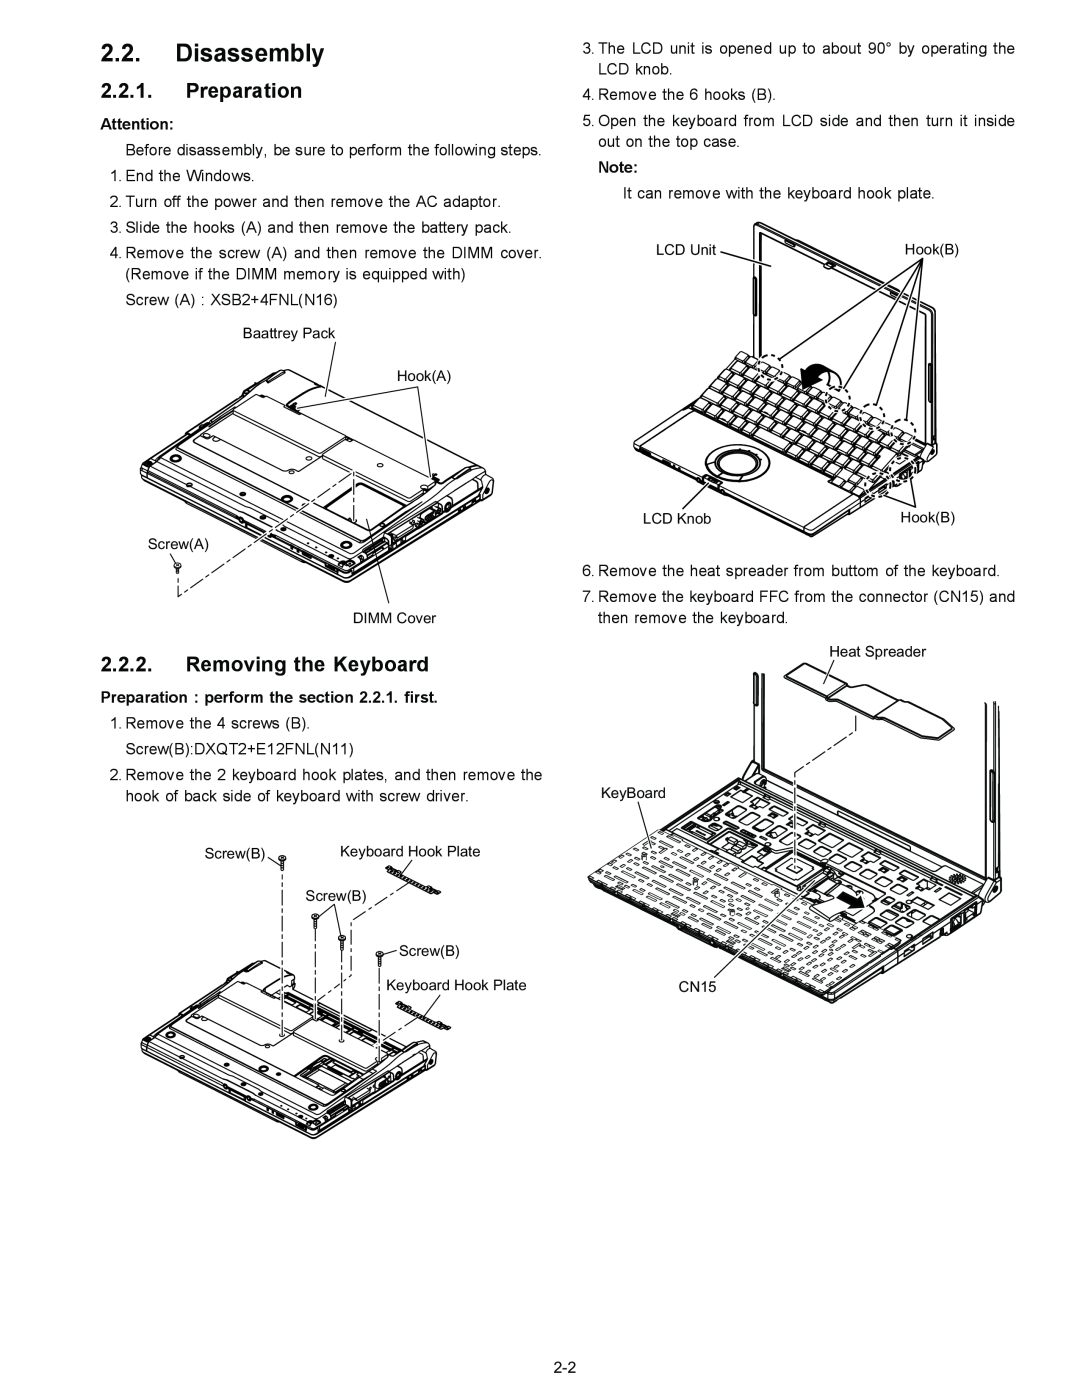 Matsushita CF-T4GWCTZ1 2 service manual Disassembly, Removing the Keyboard, Preparation perform the .2.1. first 